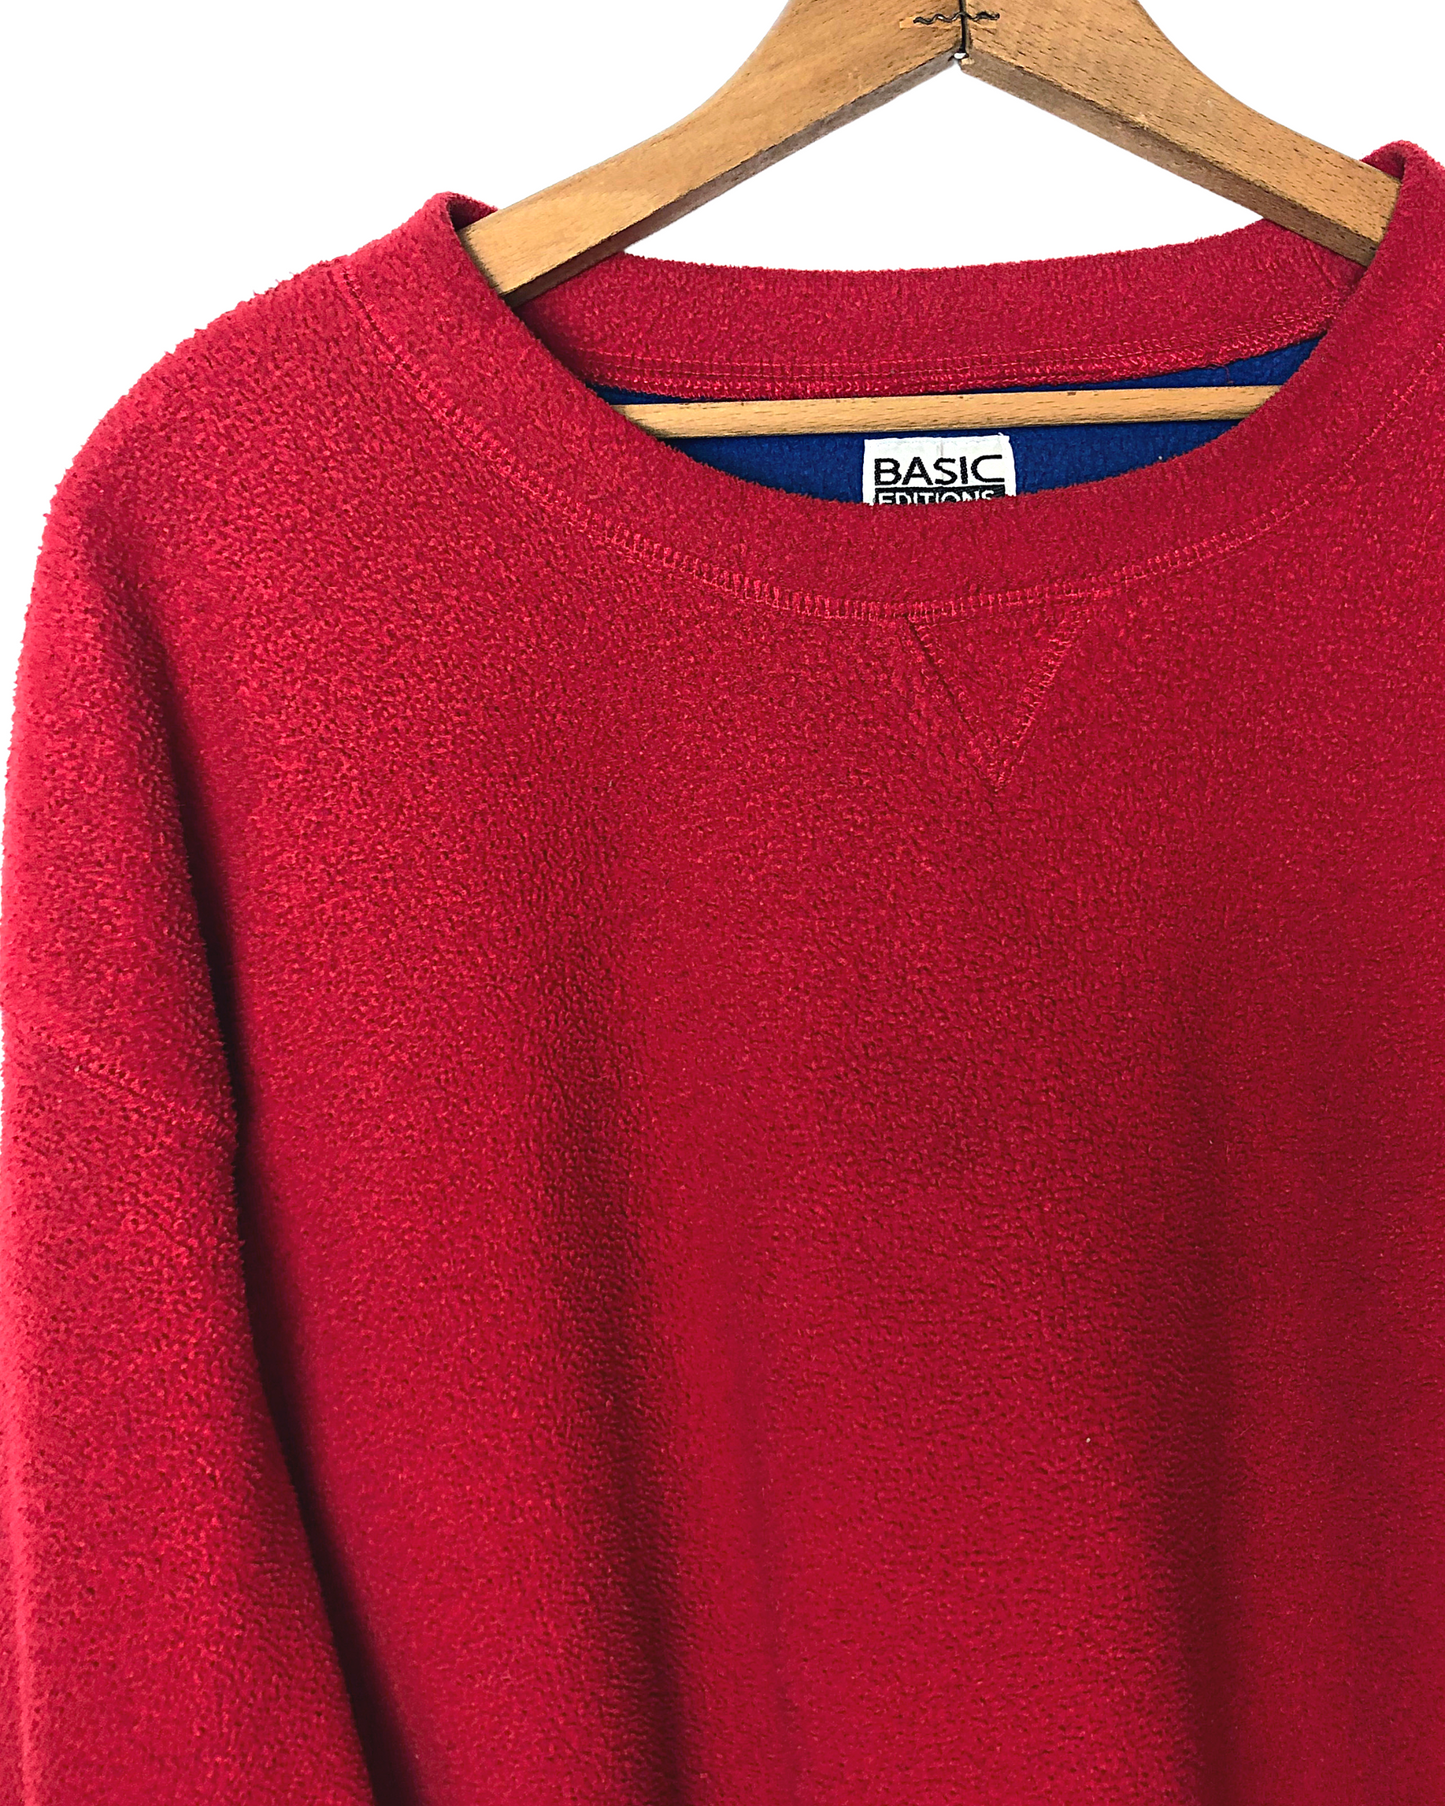 Vintage 90's Red FLEECE 'Basic Editions' Plain Raglan Fuzzy Pullover Size X-Large